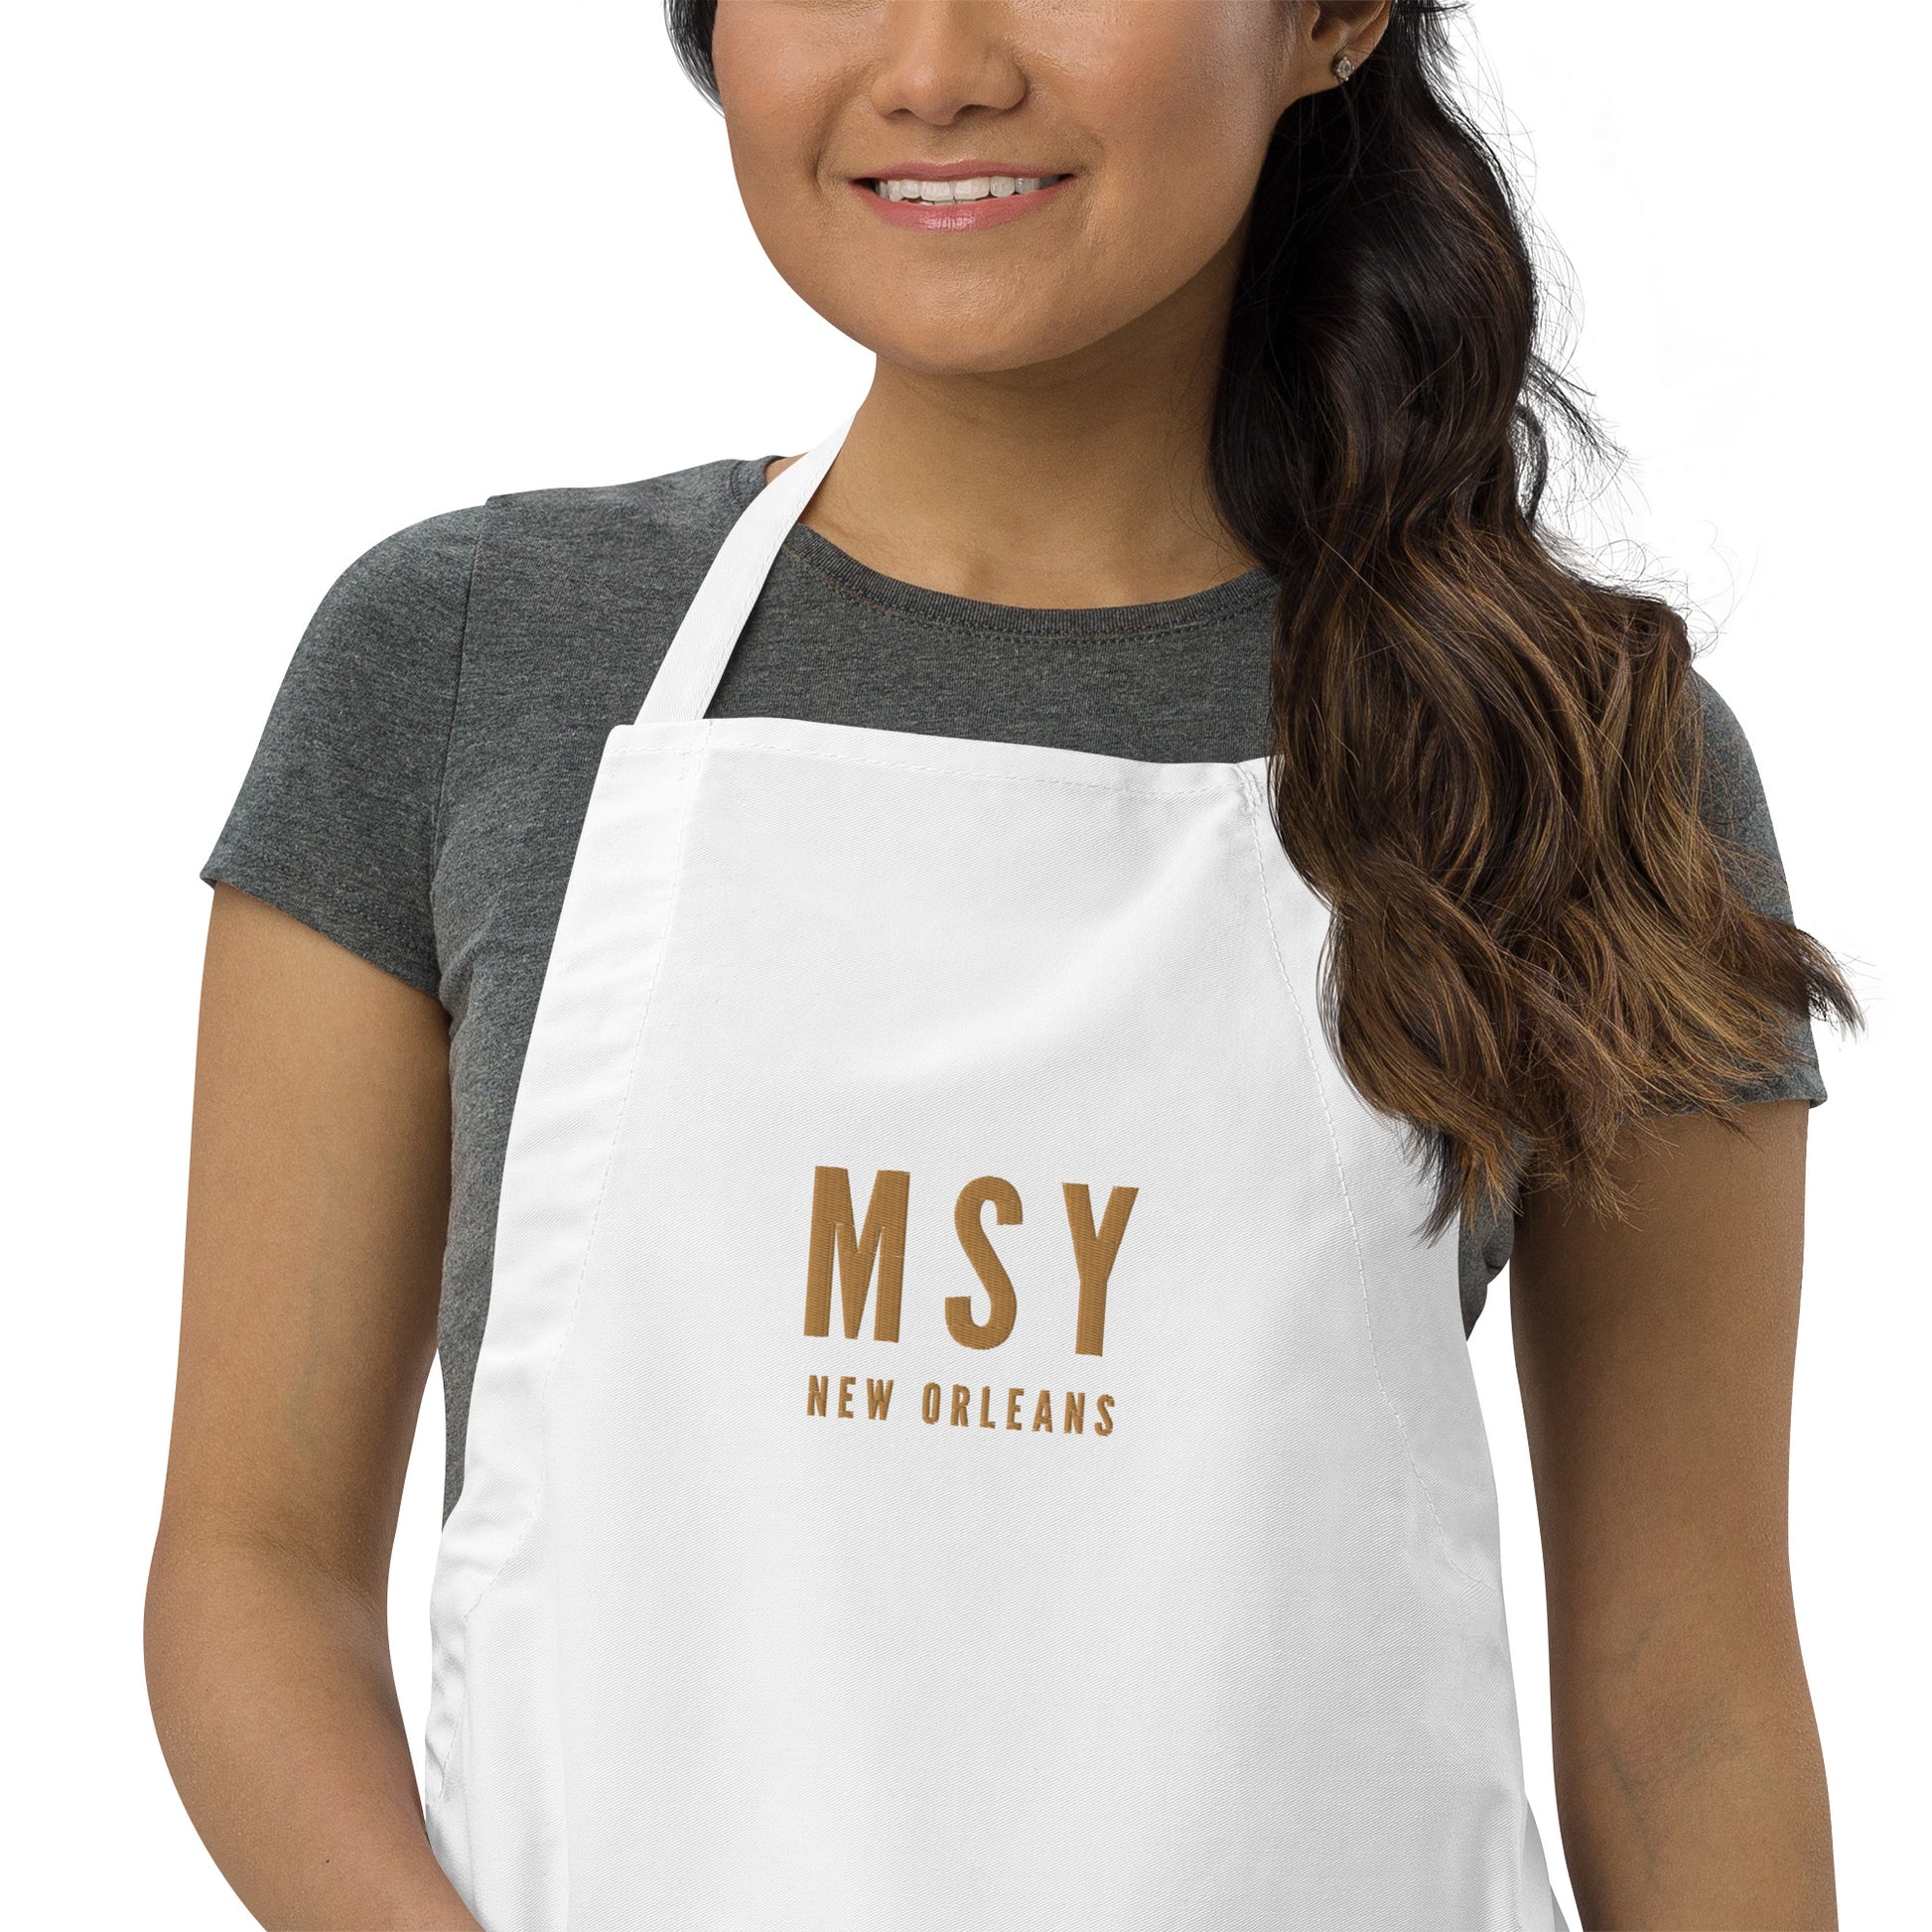 City Embroidered Apron - Old Gold • MSY New Orleans • YHM Designs - Image 08